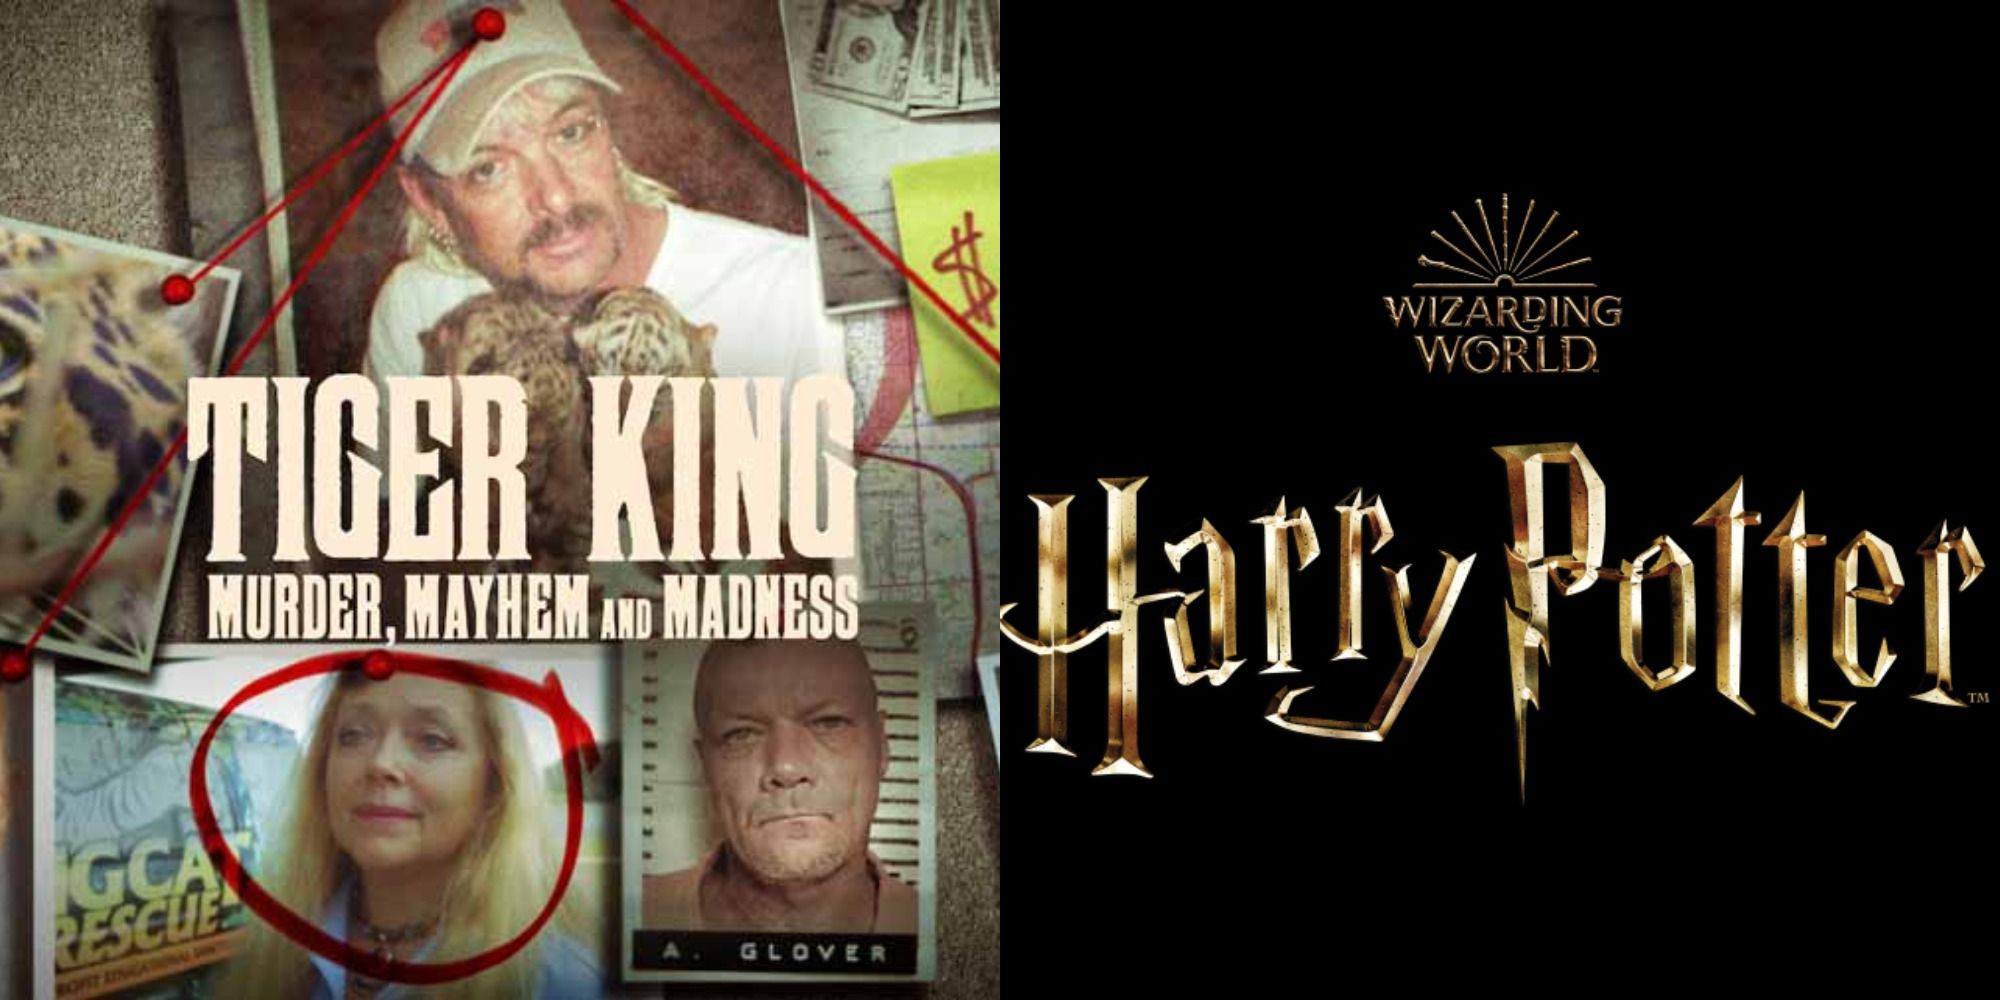 Split image showing the poster for Tiger King and the Harry potter logo